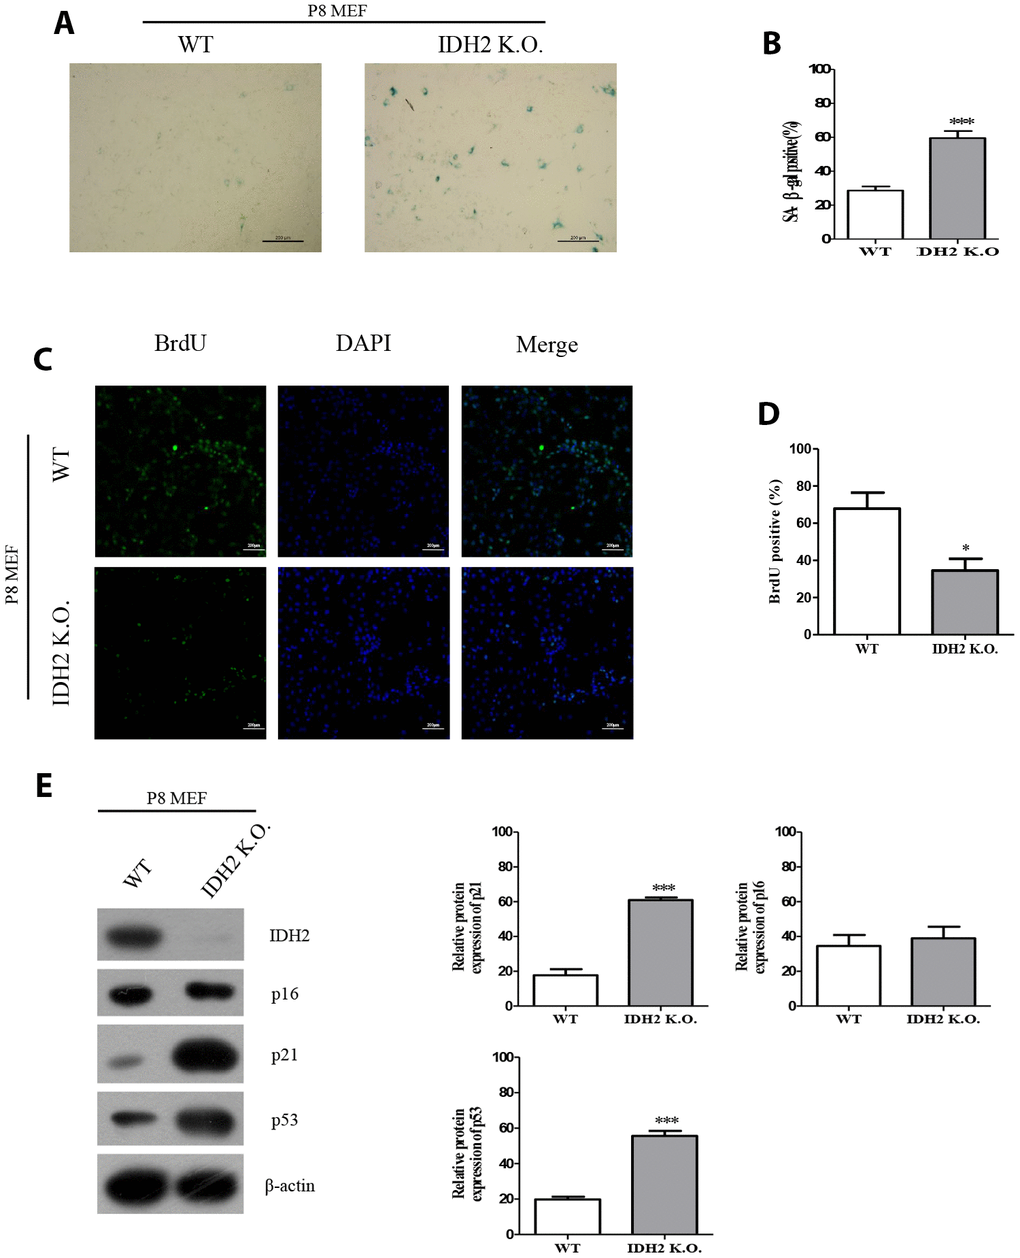 The senescence phenotype is promoted in Idh2 knockout mouse embryonic fibroblasts (MEFs). (A) SA-β-gal staining of wild type and Idh2 knockout MEFs. Passage 8 (P8) MEFs were used. Scale bar, 200 μm. (B) Statistical analysis of SA-β-gal-stained positive cells between wild type and Idh2 knockout MEFs. (C) BrdU level between wild type and Idh2 knockout MEFs as determined by immunocytochemistry. Nuclei were stained with DAPI, and the merged images show BrdU and DAPI signals. Scale bar, 10 μm. (D) Statistical analysis of BrdU-positive cells between wild type and Idh2 knockout MEFs. (E) Western blot analysis between wild type and Idh2 knockout MEFs. The following antibodies were used for detection: anti-Idh2, anti-p16, anti-p21, anti-p53, and anti-β-actin. Data are expressed as means ± SD (n = 3). *p p p 